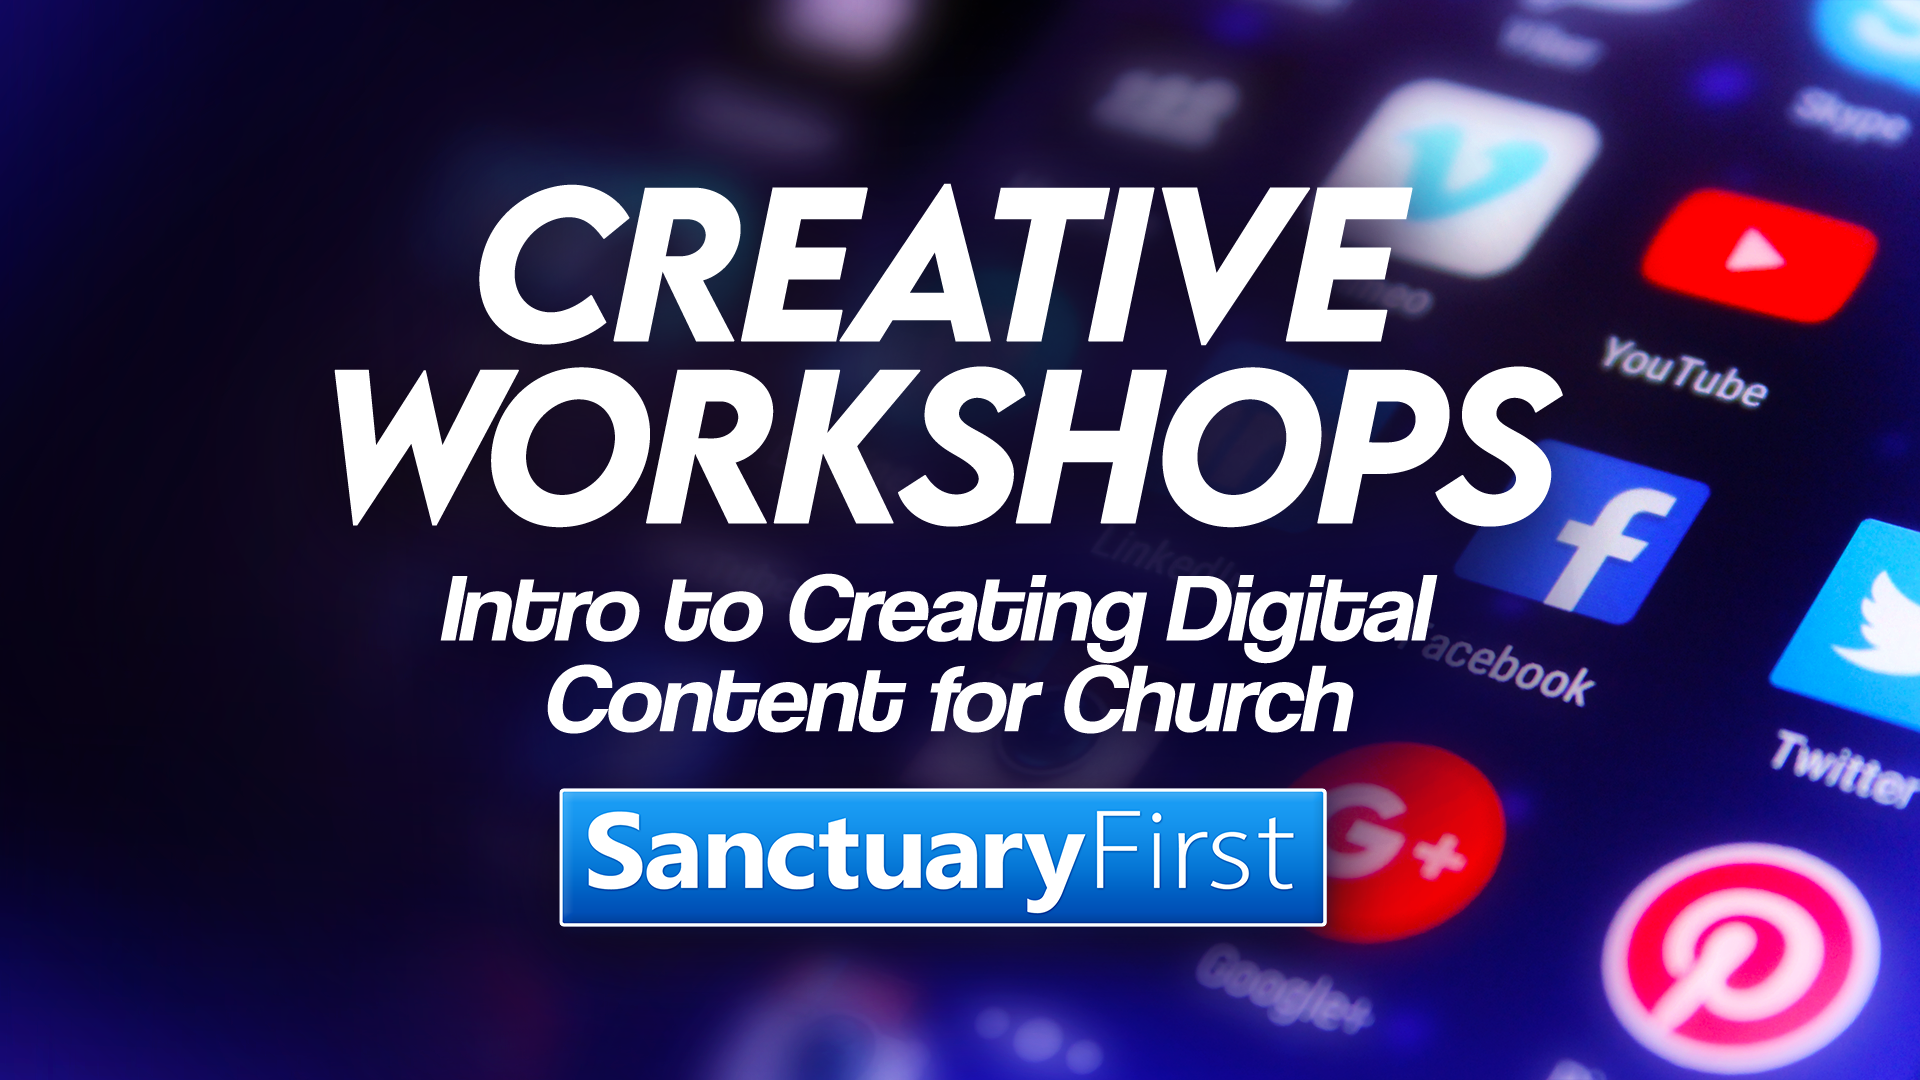 Creative Workshops - Intro to Creating Digital Content for Church